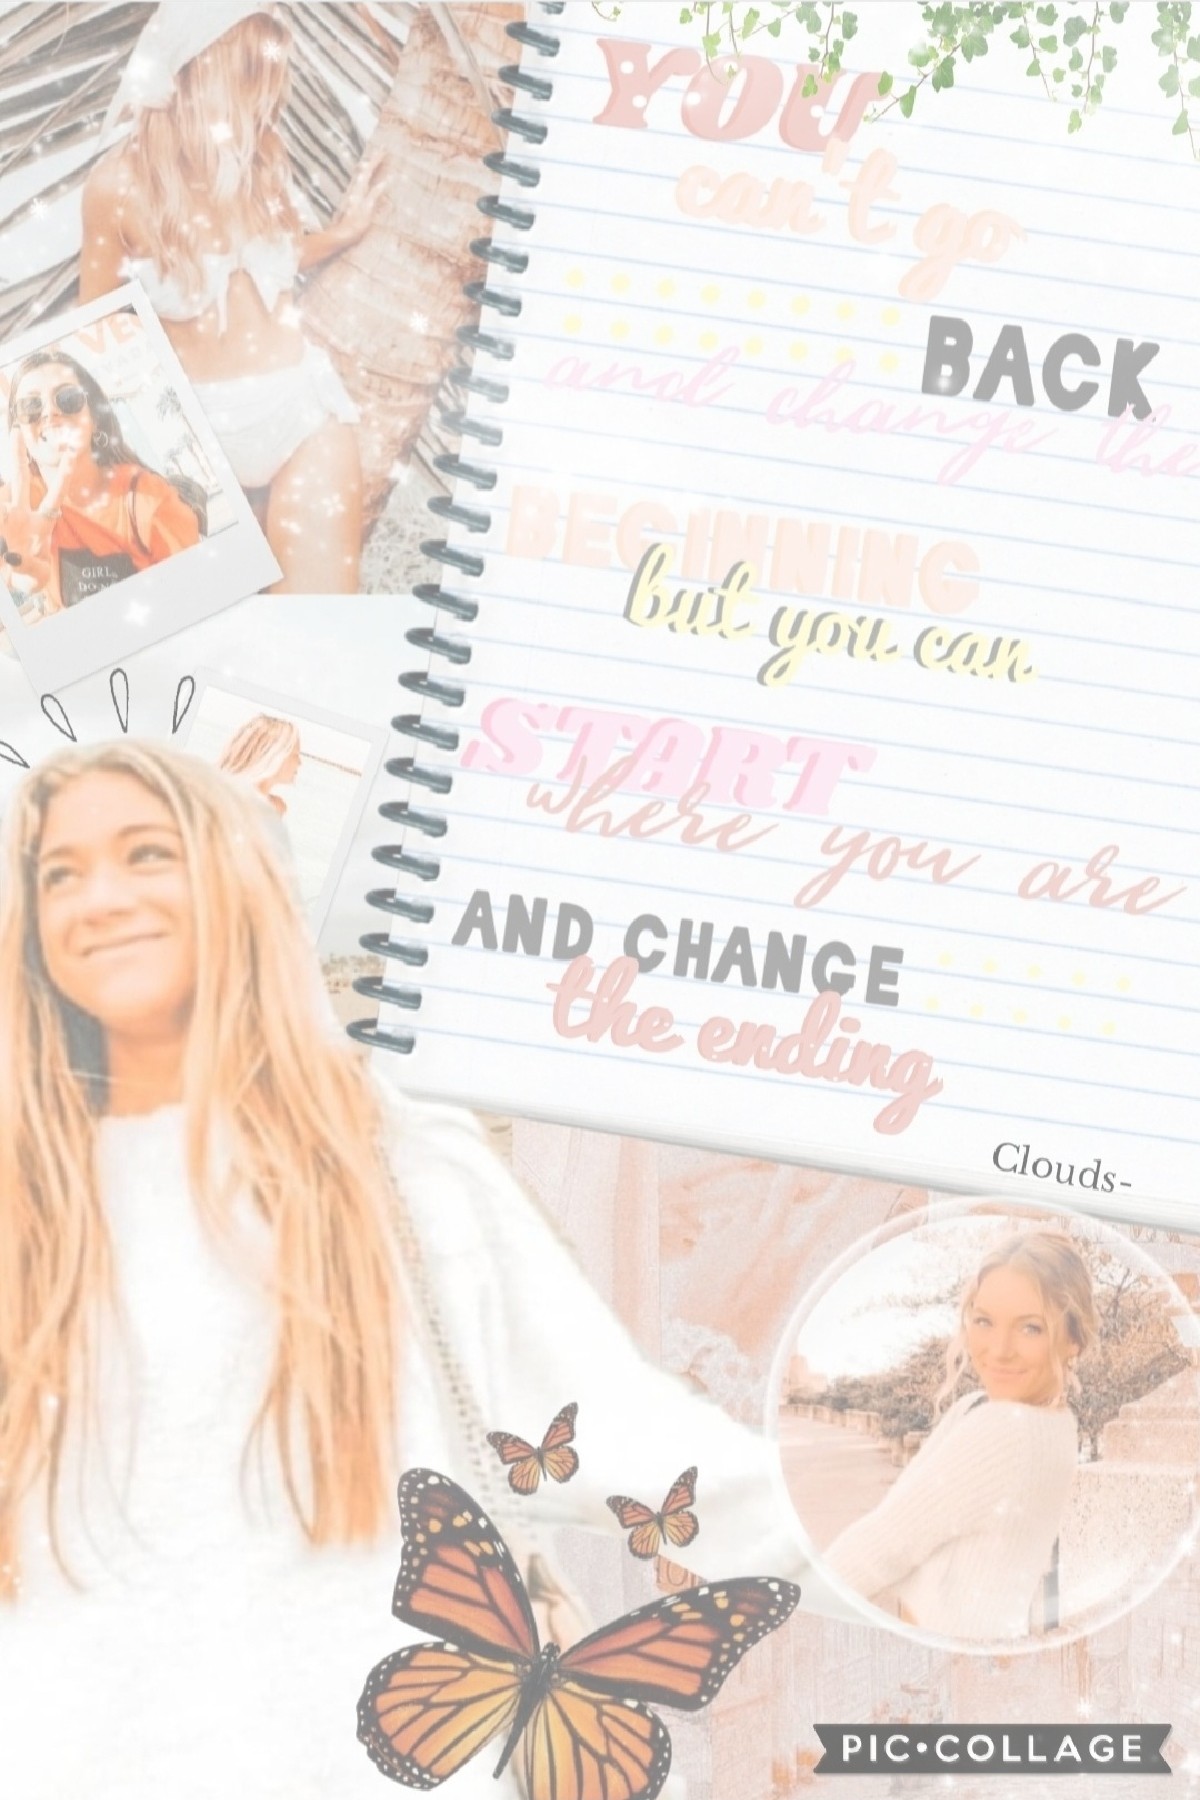           💘 tap 💘


    ✨️heyy! OMGGG 1ST peachy collage, I'm super proud of it!! 🤩💖  hru guys? 💞 literally counting the days before school, don't know whether to be excited or nervous 😕 
      QOTD: Peachy or Preppy?
    AOTD: Both, I can't choose 😅